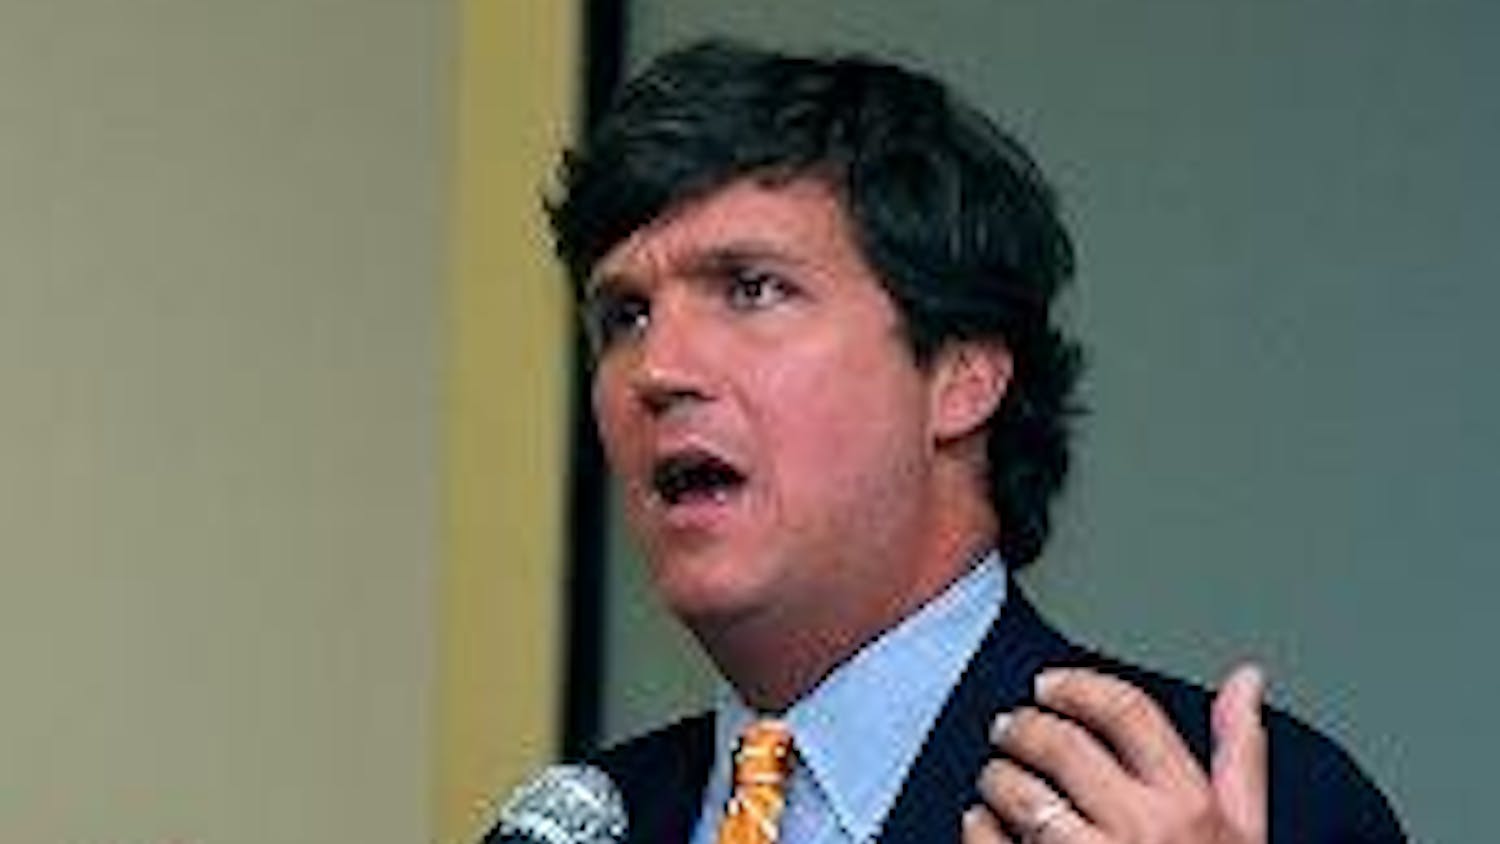 TALKIN' WITH TUCKER - Tucker Carlson, host of MSNBC's "Tucker," spoke at an AU College Republicans event Wednesday night. He said foreign policy will be an important issue in the presidential election.